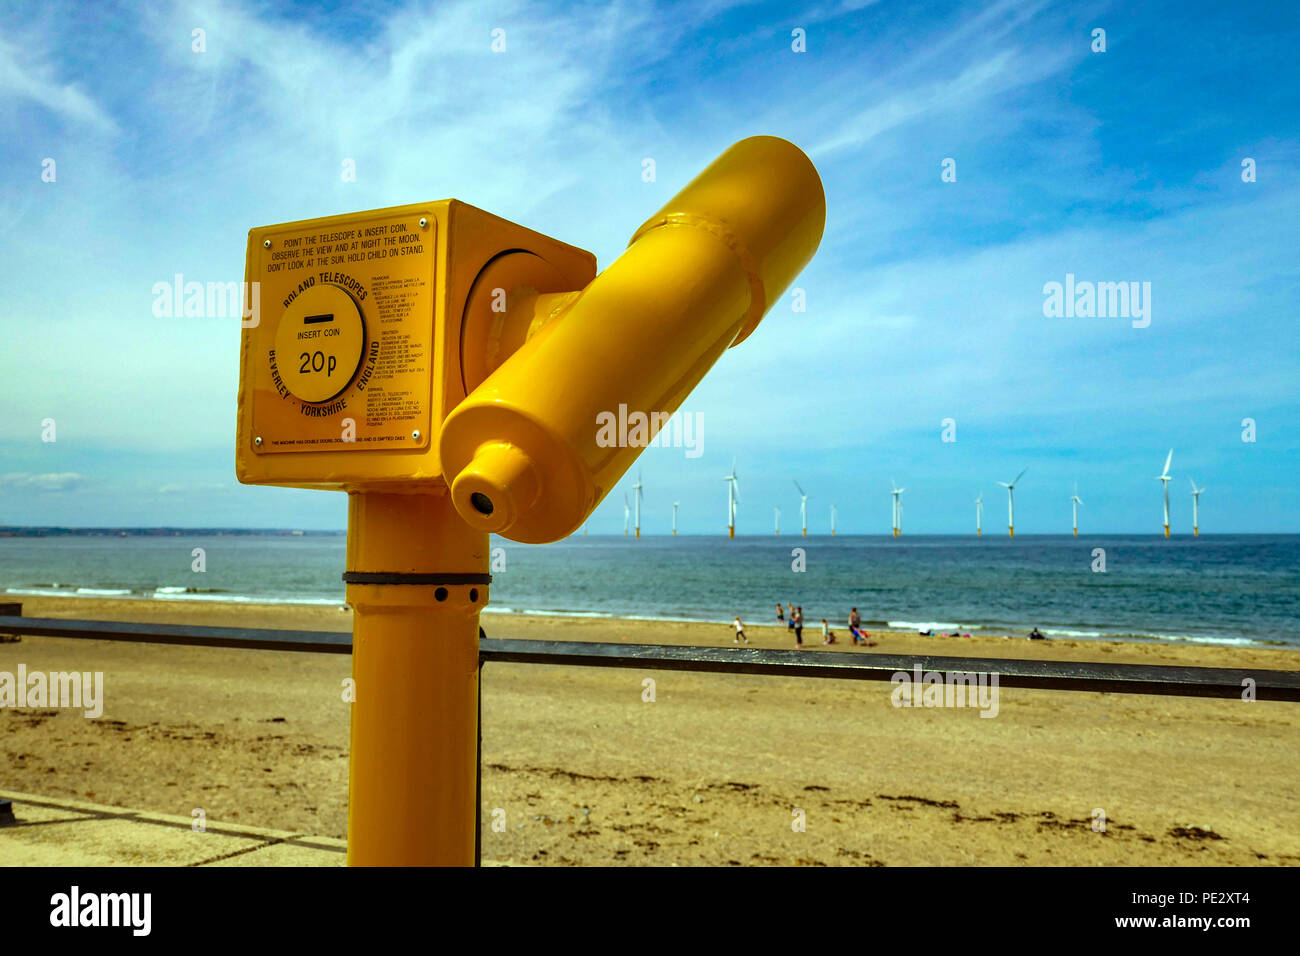 Pay to view yellow telescope, Redcar, North Yorkshire, England, UK, seaside, holiday Stock Photo